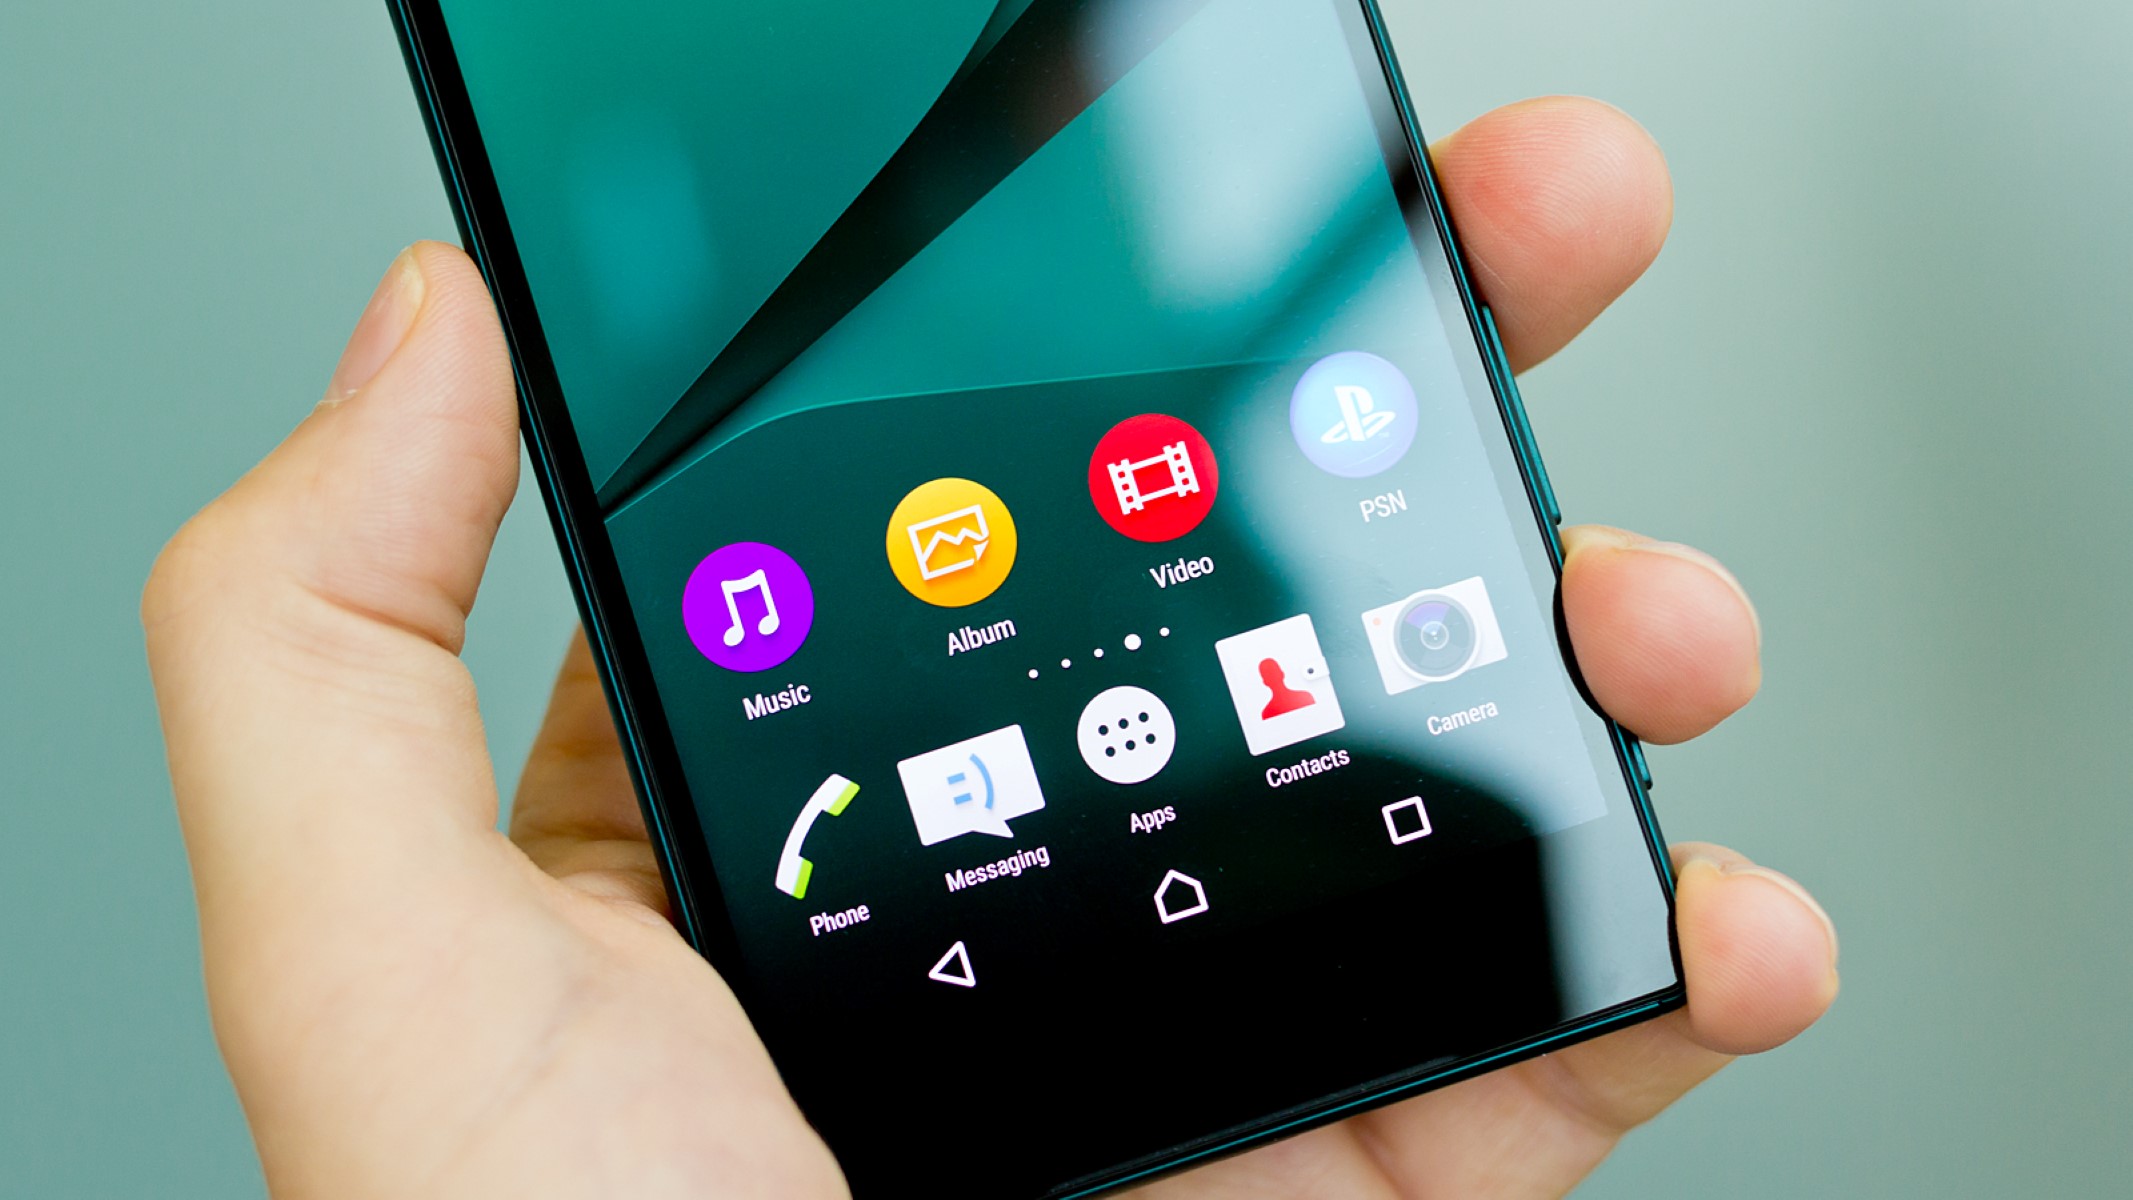 Xperia Z Screen Capture: A Step-by-Step Guide